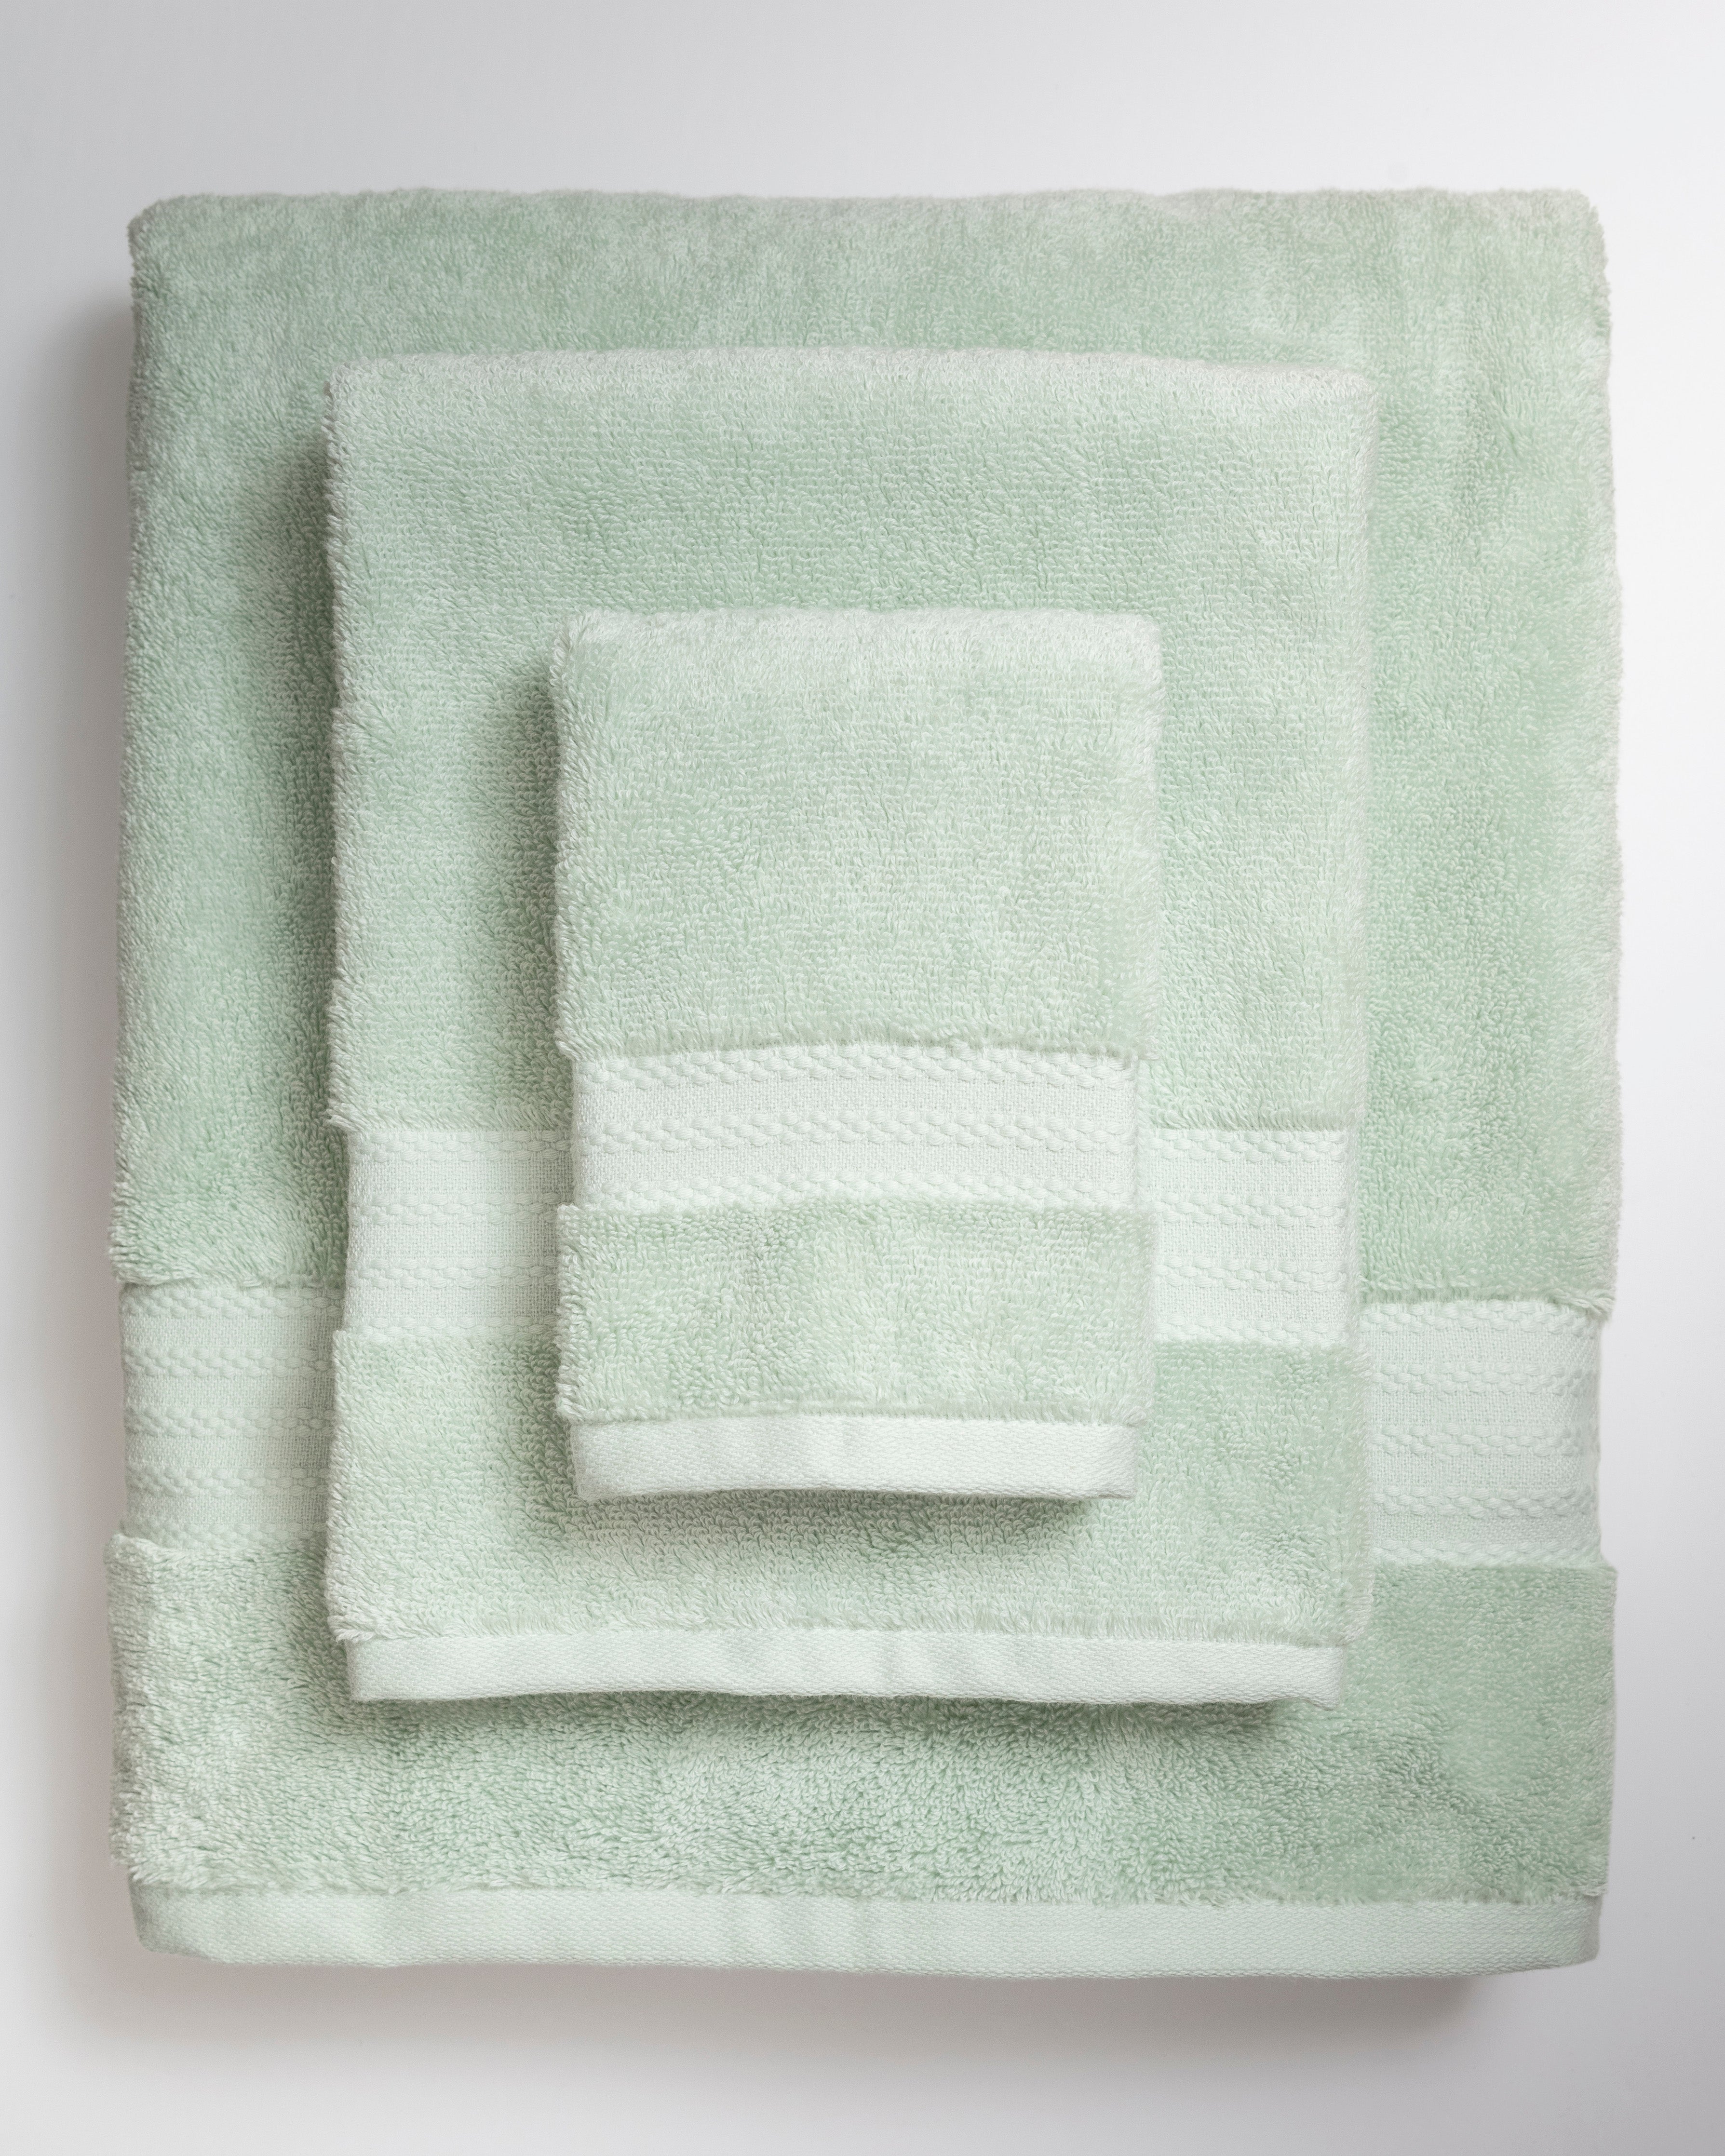  Groko Textiles Small and Lightweight Cotton Towels